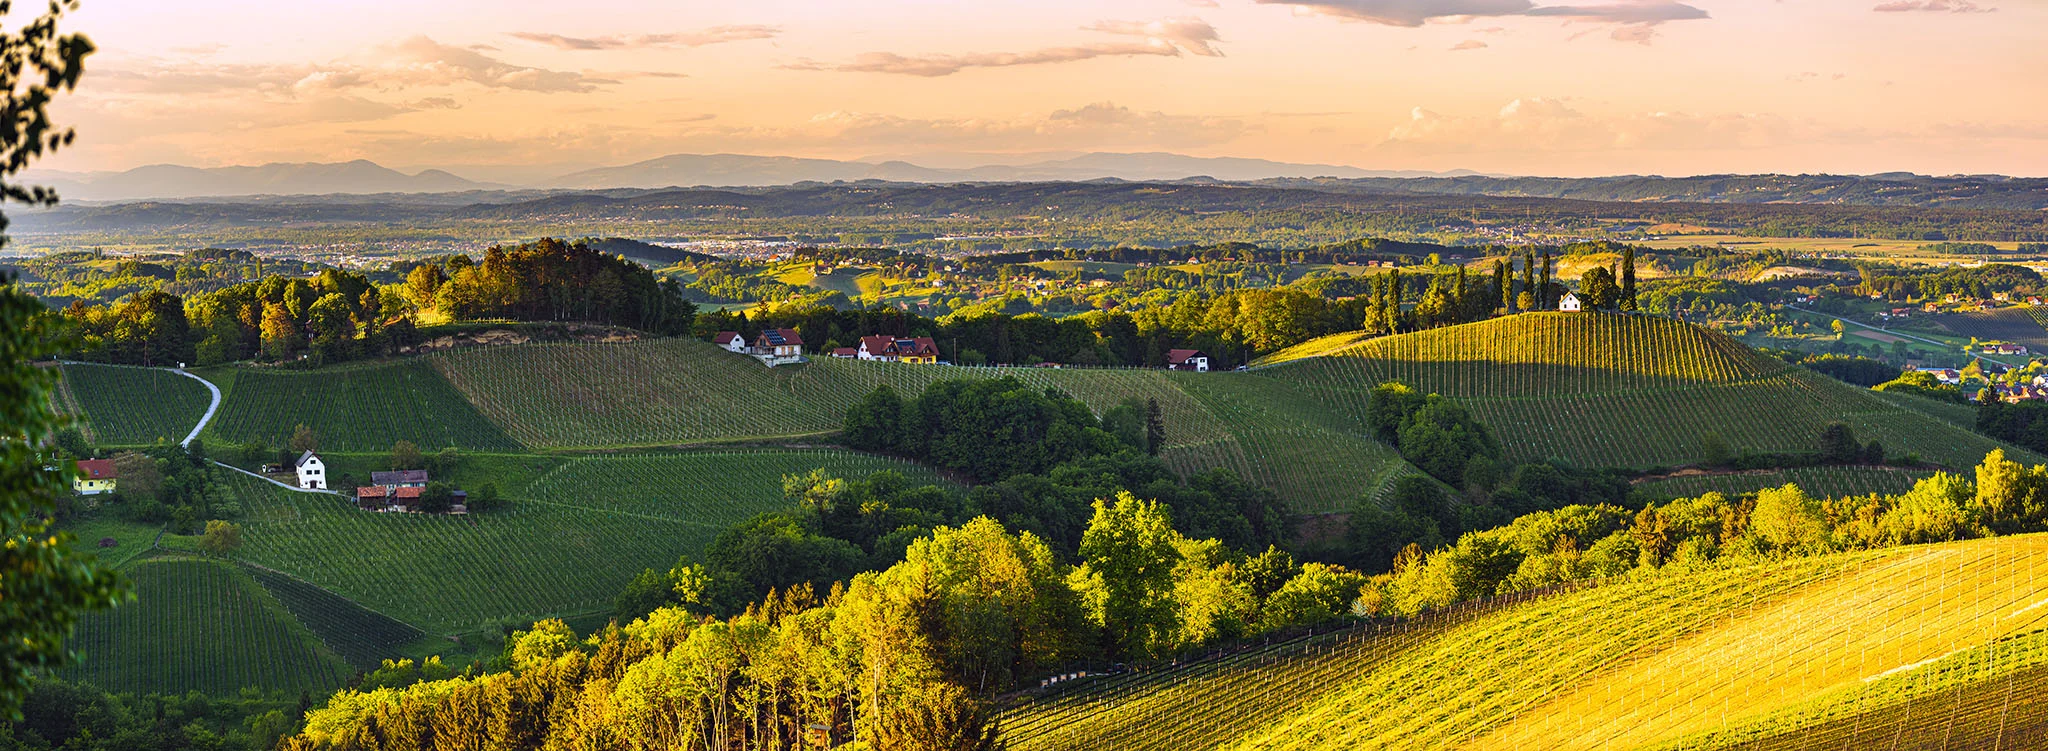 Sunset over South Styria vineyard landscape in Steiermark, Austria. Beautiful tranquil destination to visit for famous white wine. Tra